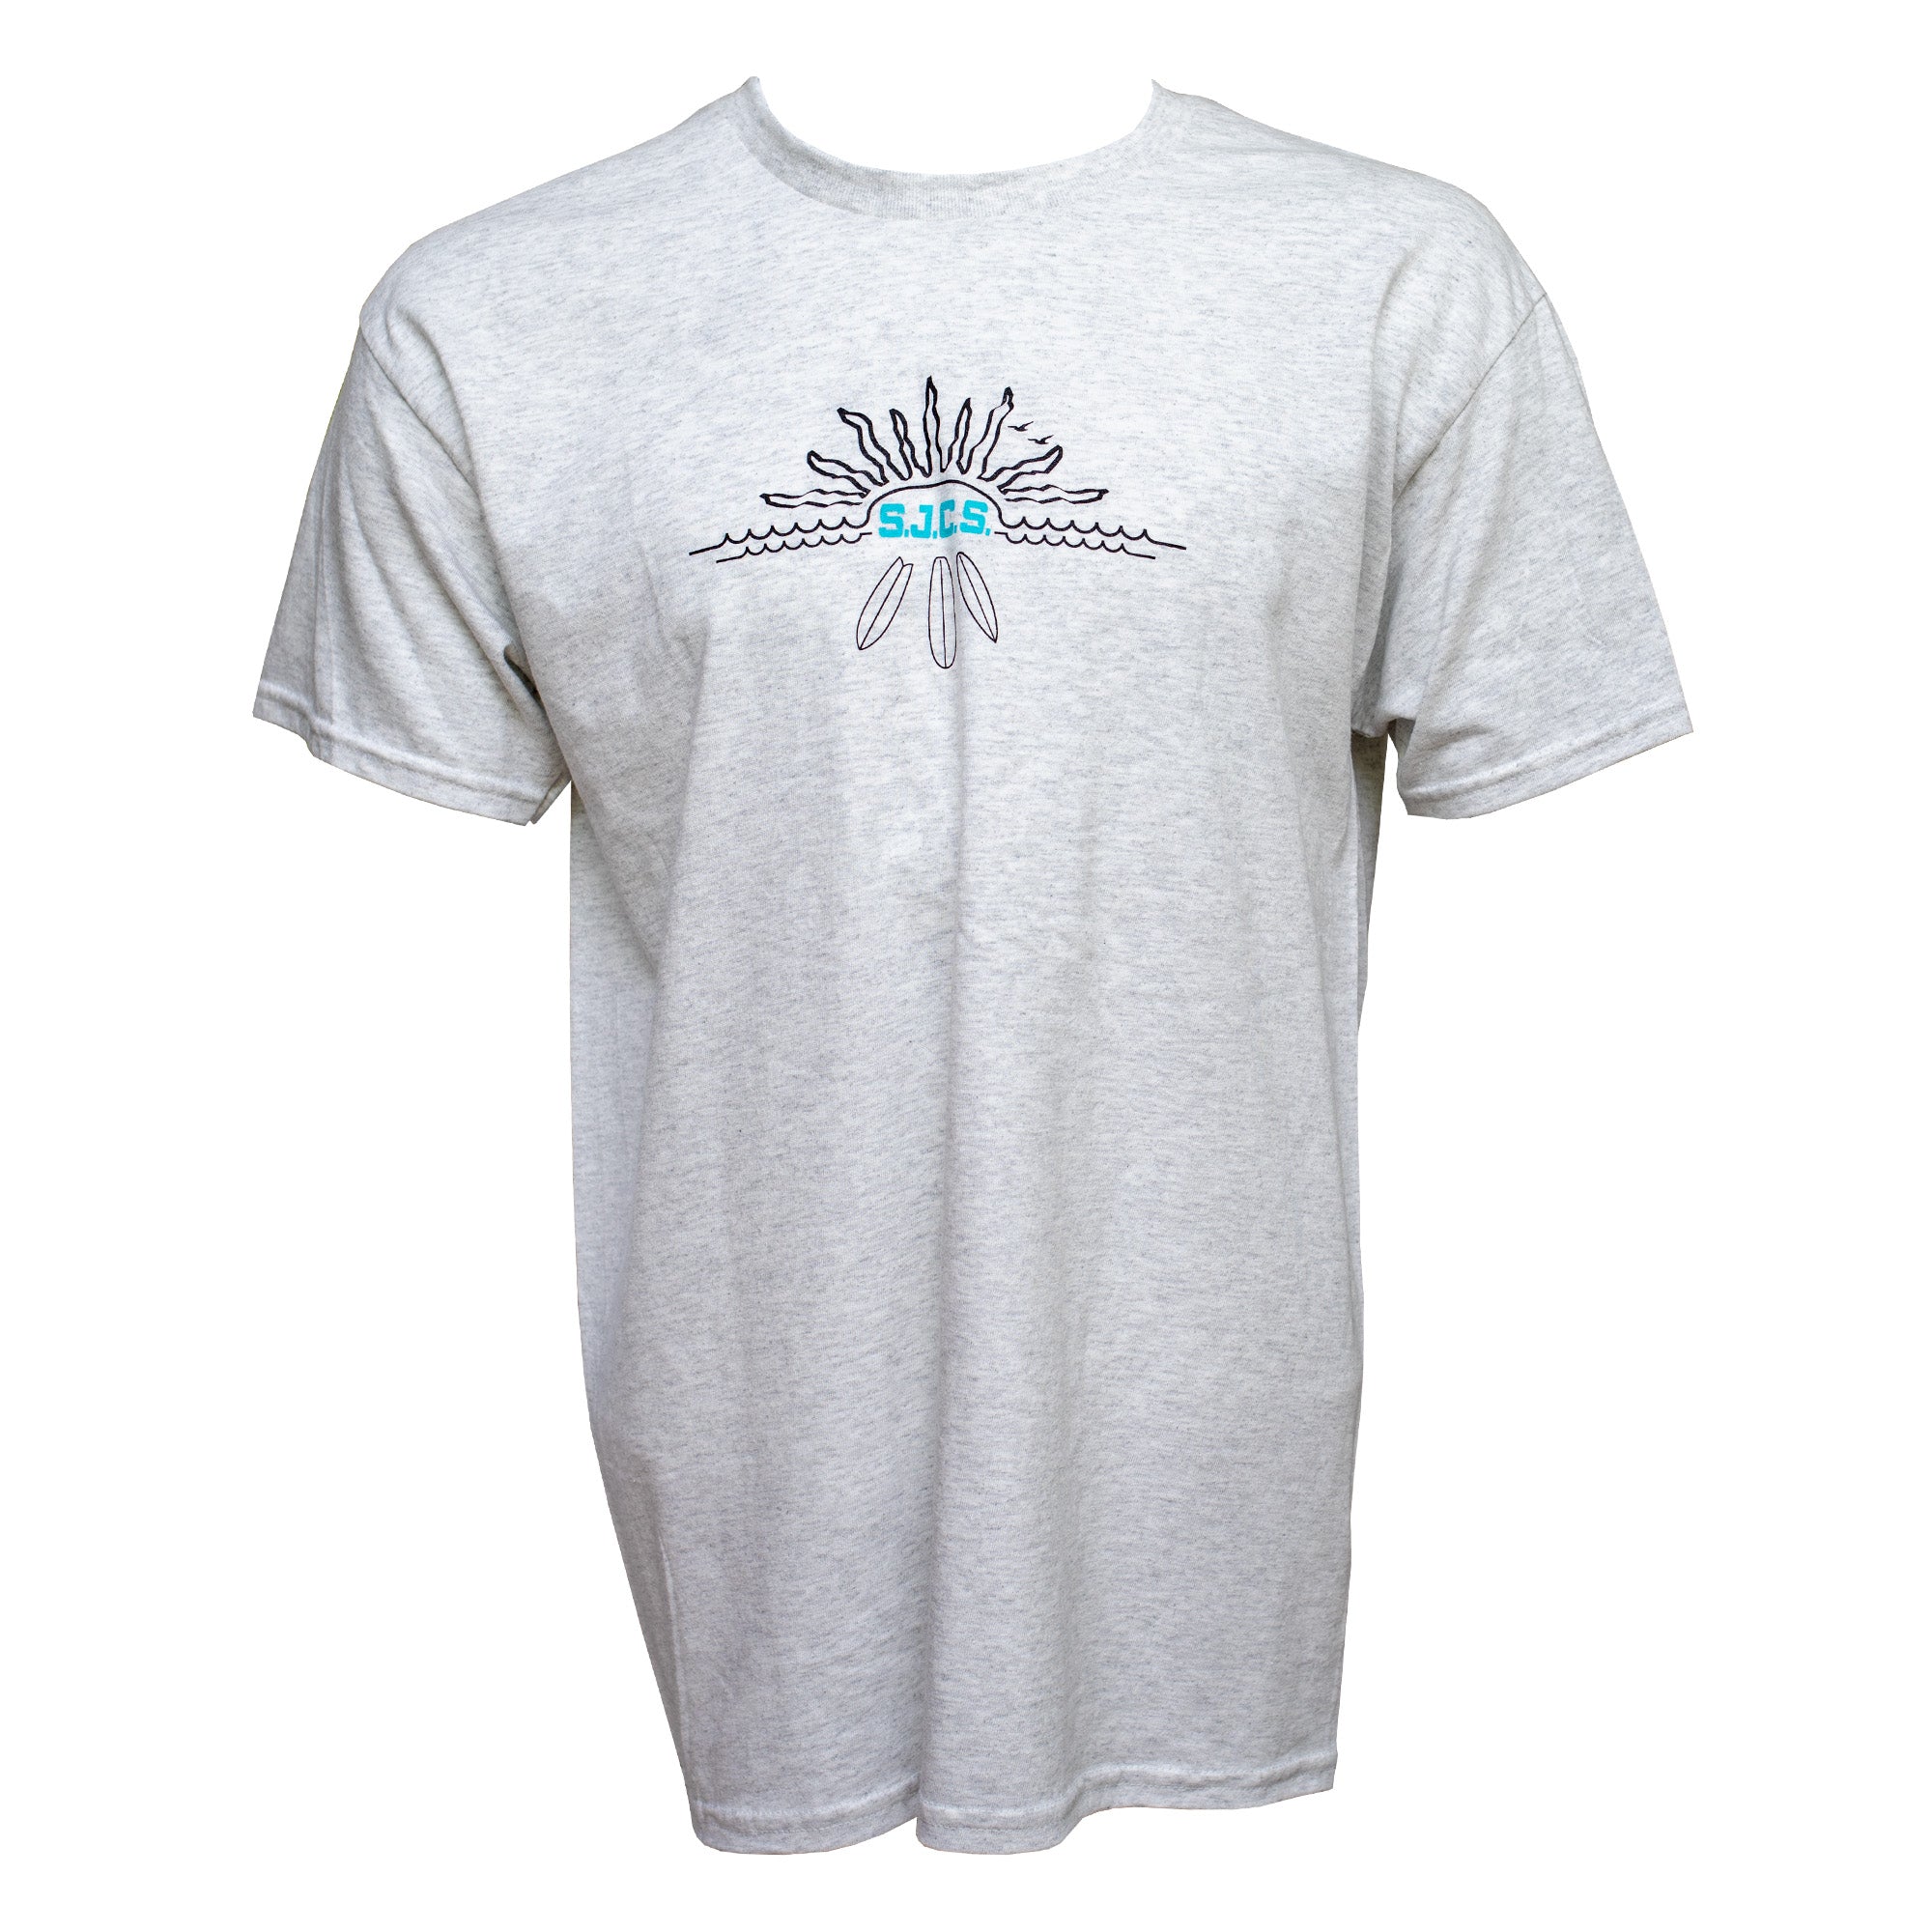 St. Johns County Shapers Men's S/S T-Shirt